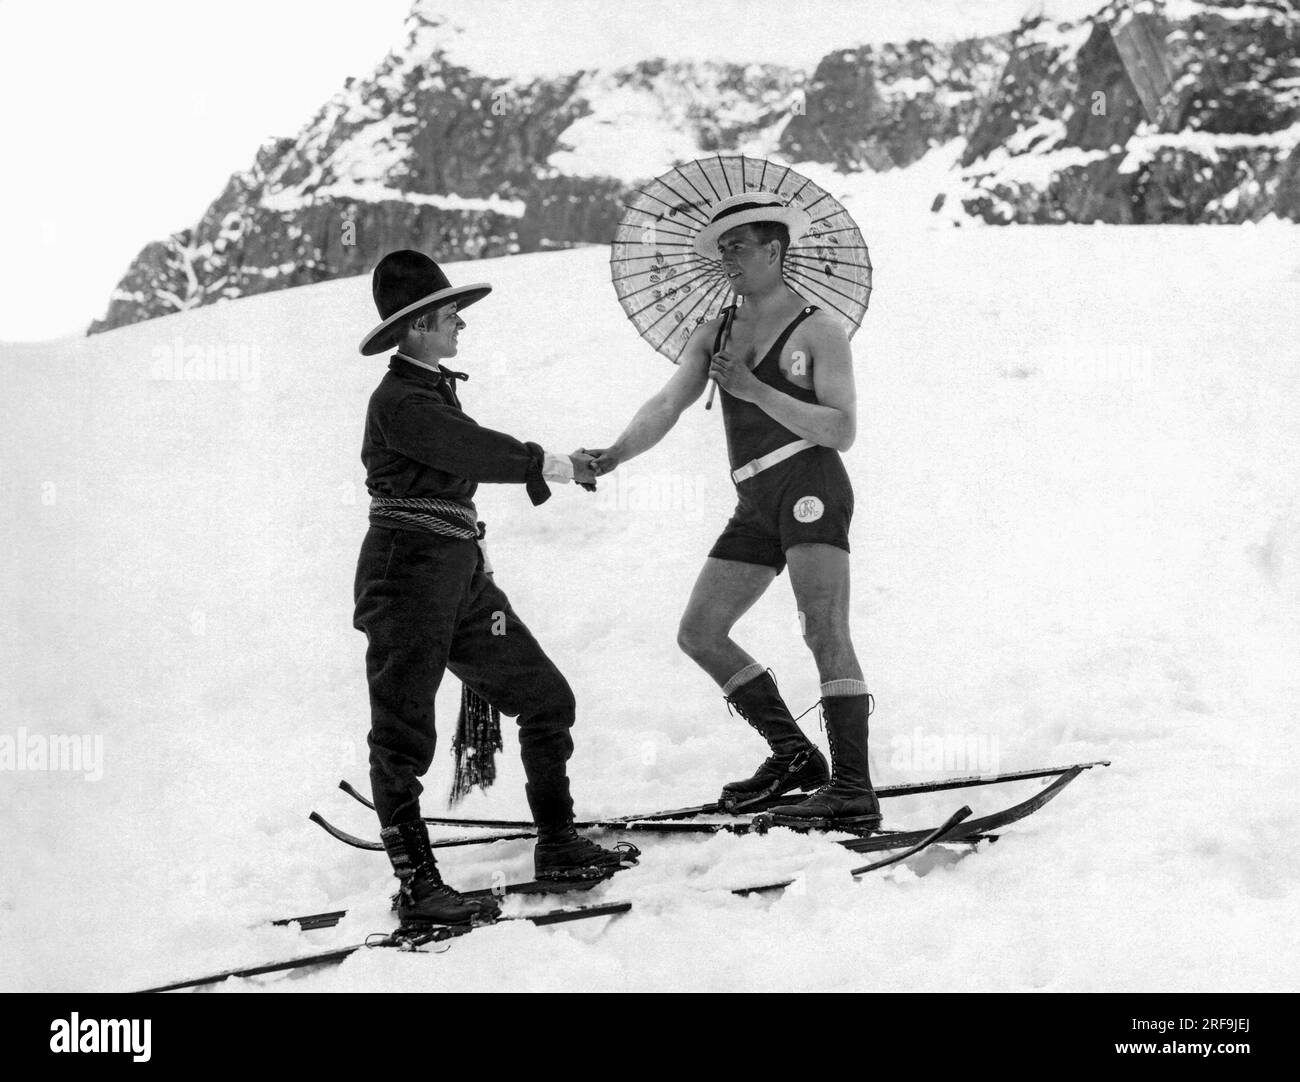 United States: c. 1923. A woman skier on the mountain slope wearing a sash and western hat shakes hands with a man on skis in a one piece bathing suit and carrying a parasol. Stock Photo